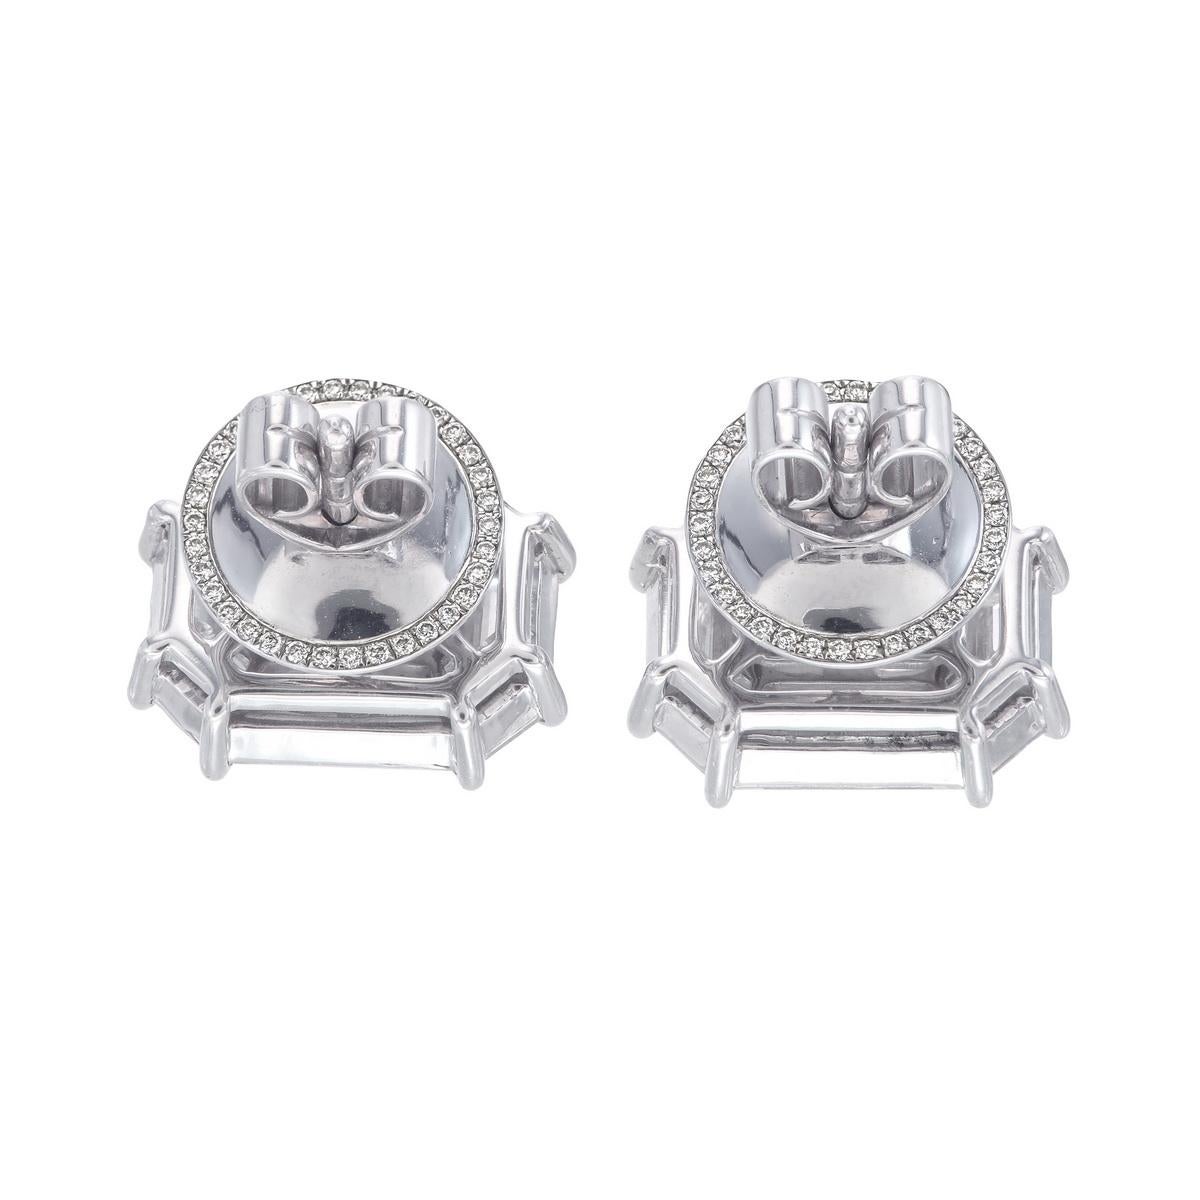 Anglo-Indian 15 carat face up Invisible set emerald cut shaped piecut diamond earrings For Sale